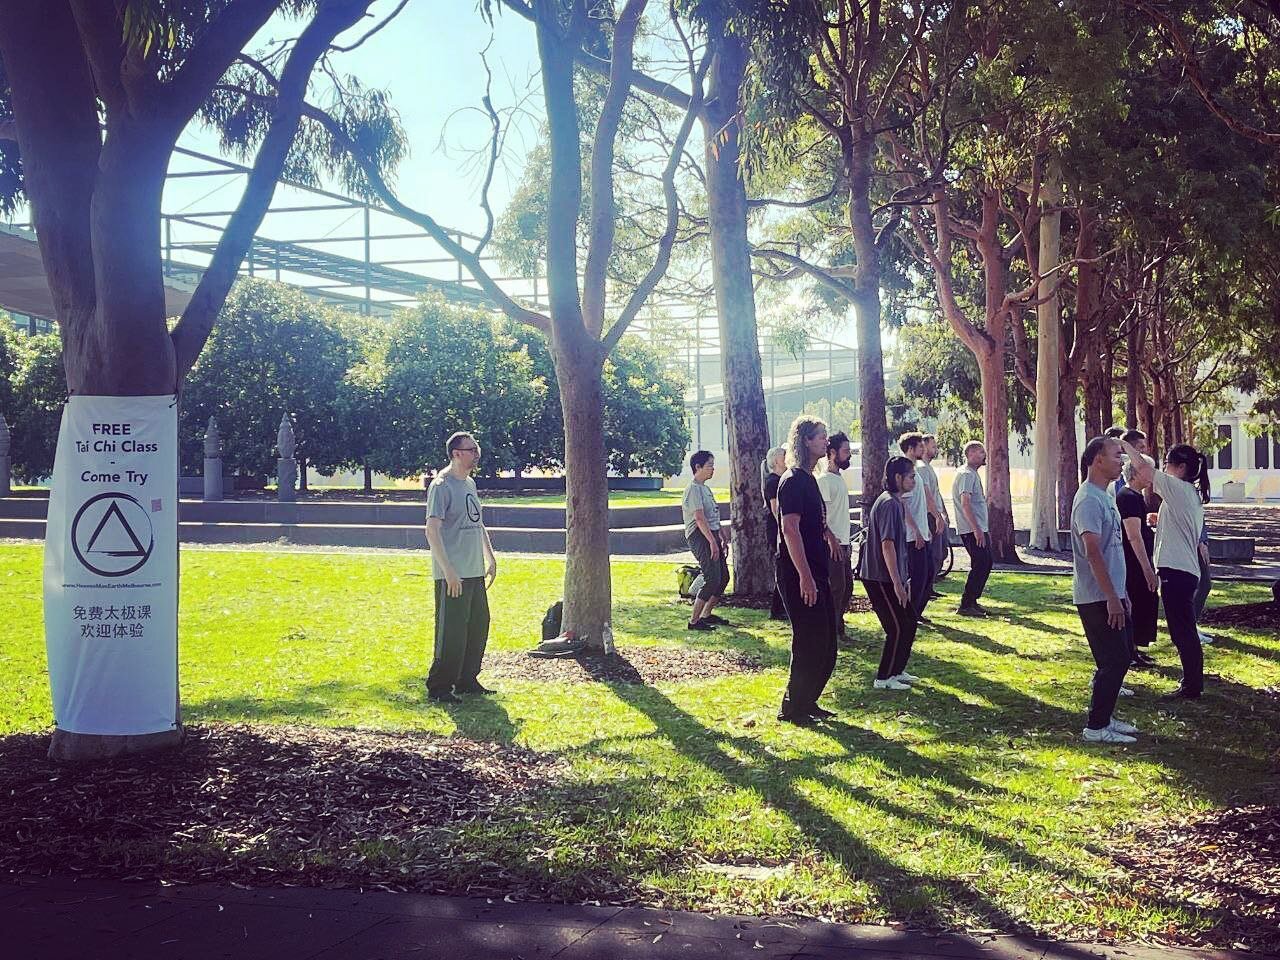 TaiChi in the park each Saturday while the weather is fine ☀️ 

Come tomorrow &amp; try real Taiji for yourself

#thingstodoinmelbourne #carltongardens #kungfumelbourne #taijiquan #taichimelbourne #livewellbewell